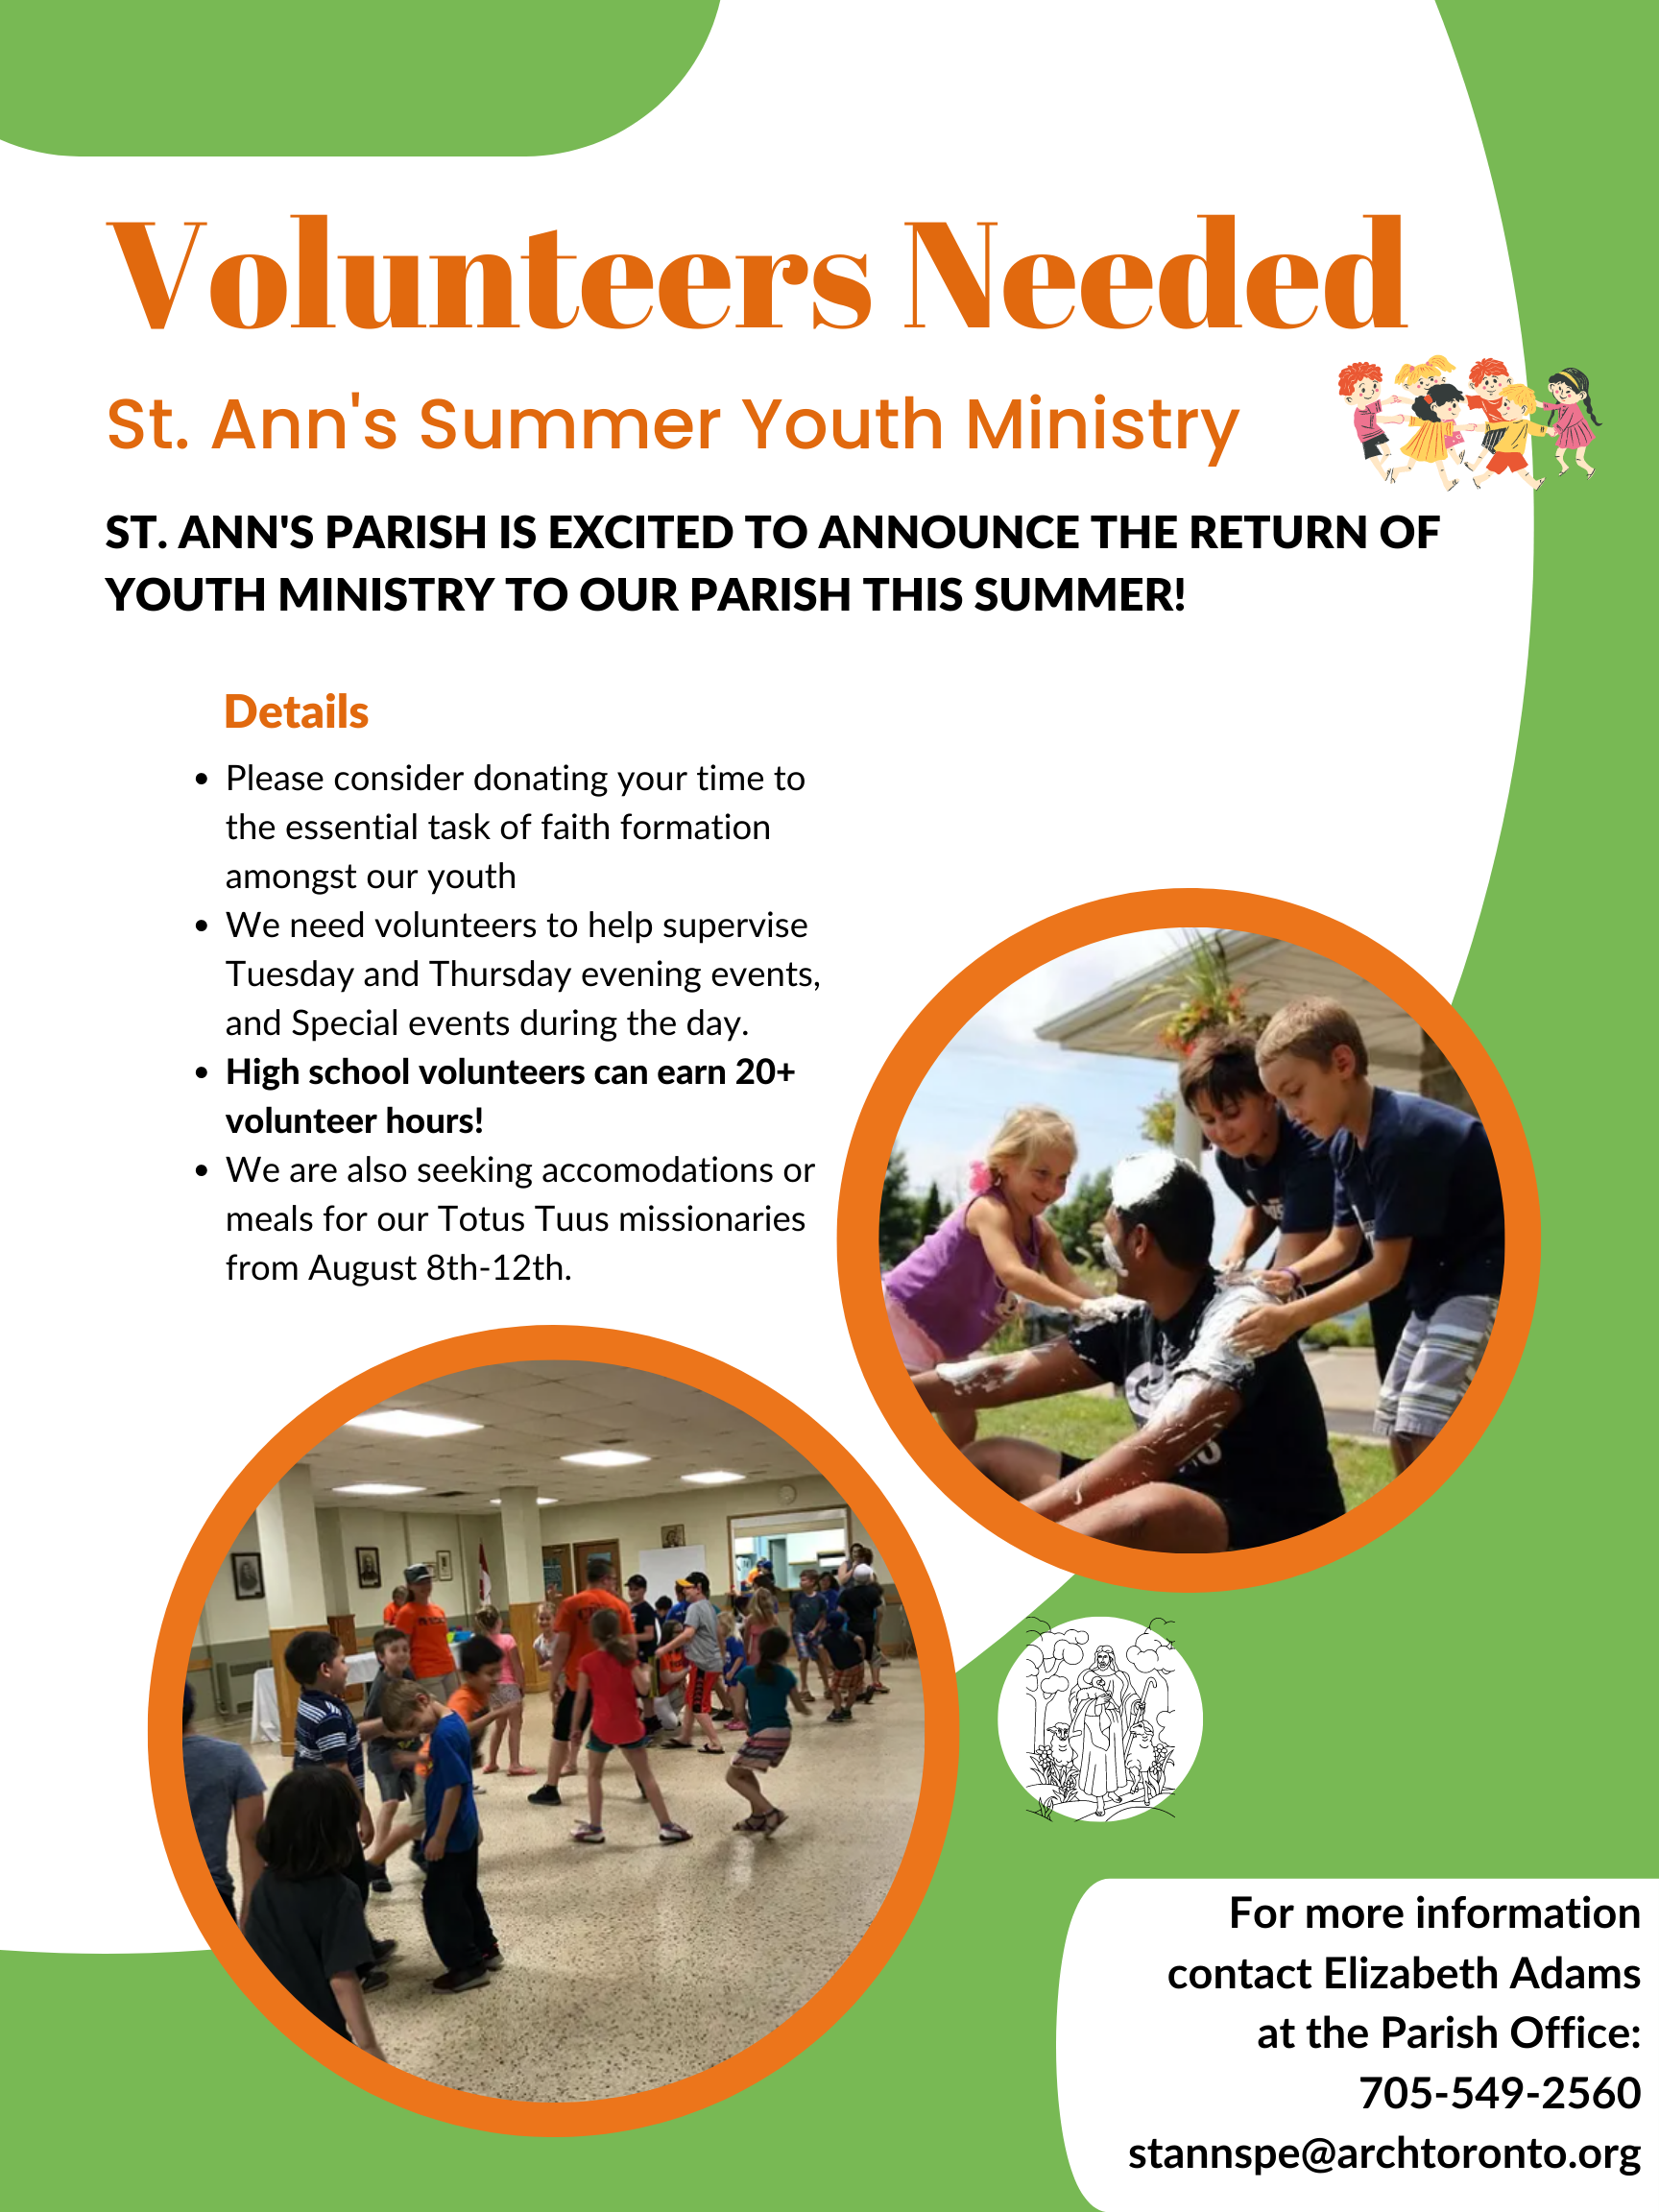 Volunteers Poster 'Volunteers Needed' 'St ann's Summer Youth Ministry' 'St. Ann's Parish is excited to announce the return of youth ministry to our parish this summer' 'Details - please consider donating you time to the essential task of faith formation amongst our youth - we need volunteers to help supervise Tuesday and thursday evening events, ad special events during the day - highschool volunteers can earn 20+ volunteers hours - we are also seeking accomodations or meals for our totus tuus missionaries from august 8th-12th.' 'For more information contact Elizabeth Adams at the Parish office; 705-549-2560-stannspe@archtoronto.org'.